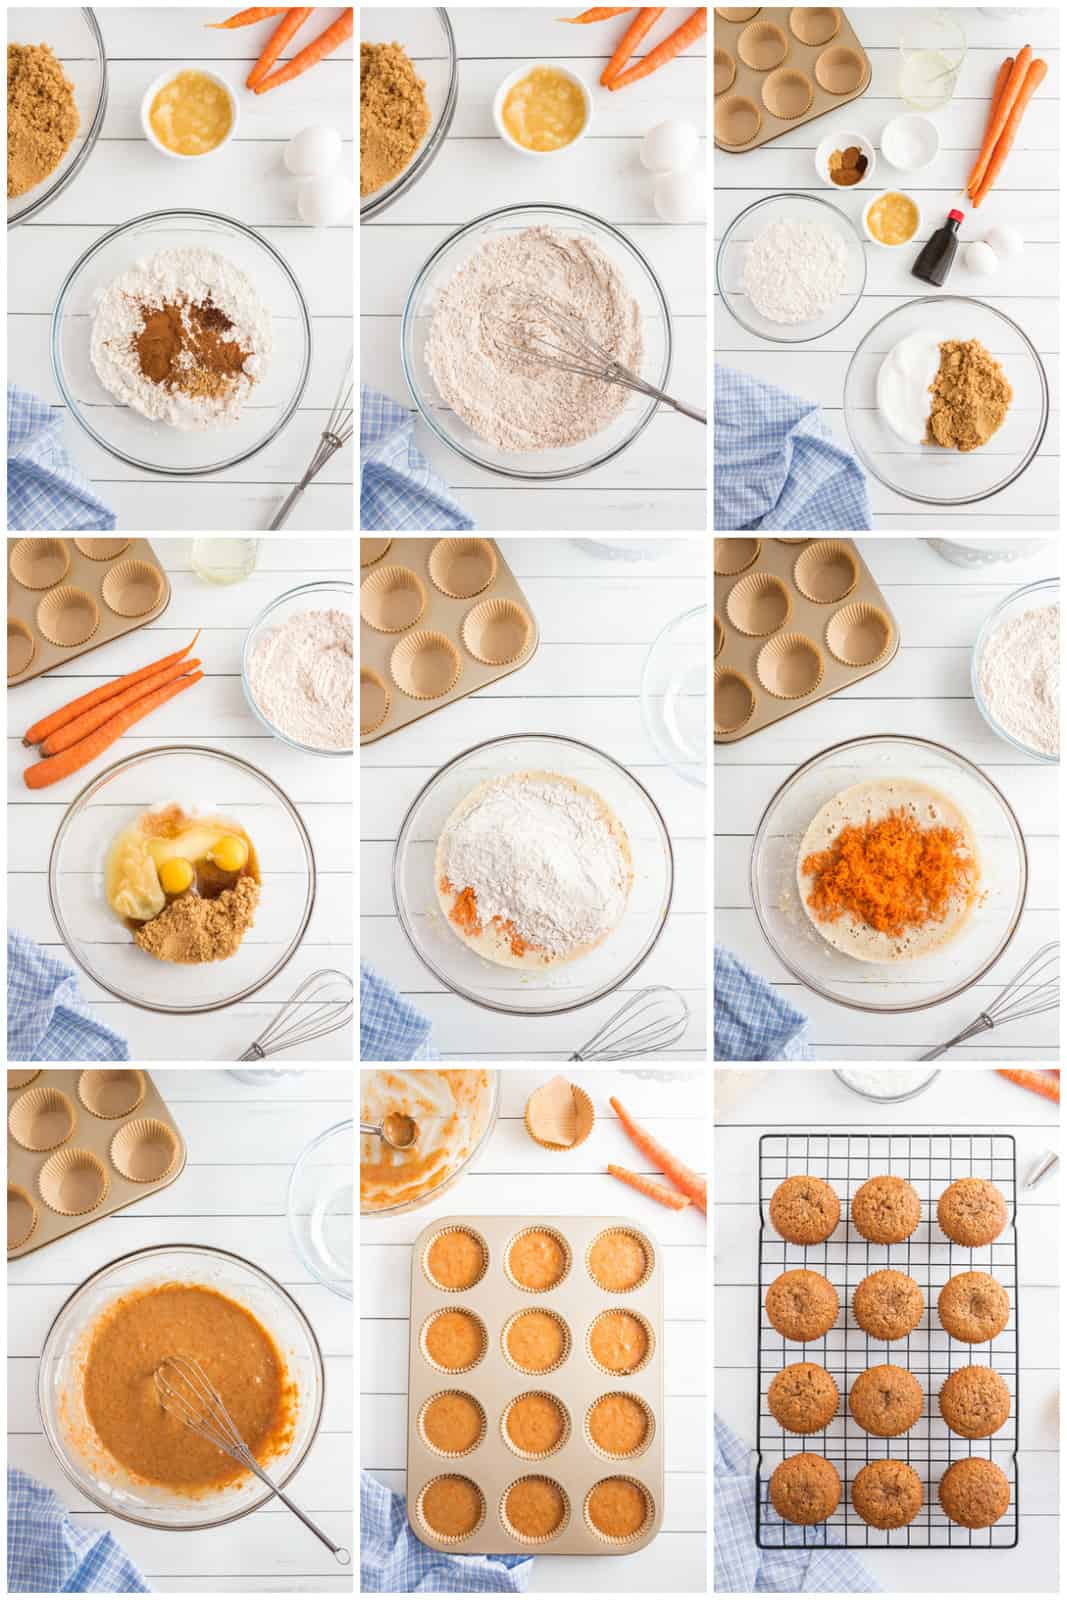 Step by step photos on how to make Carrot Cake Cupcakes